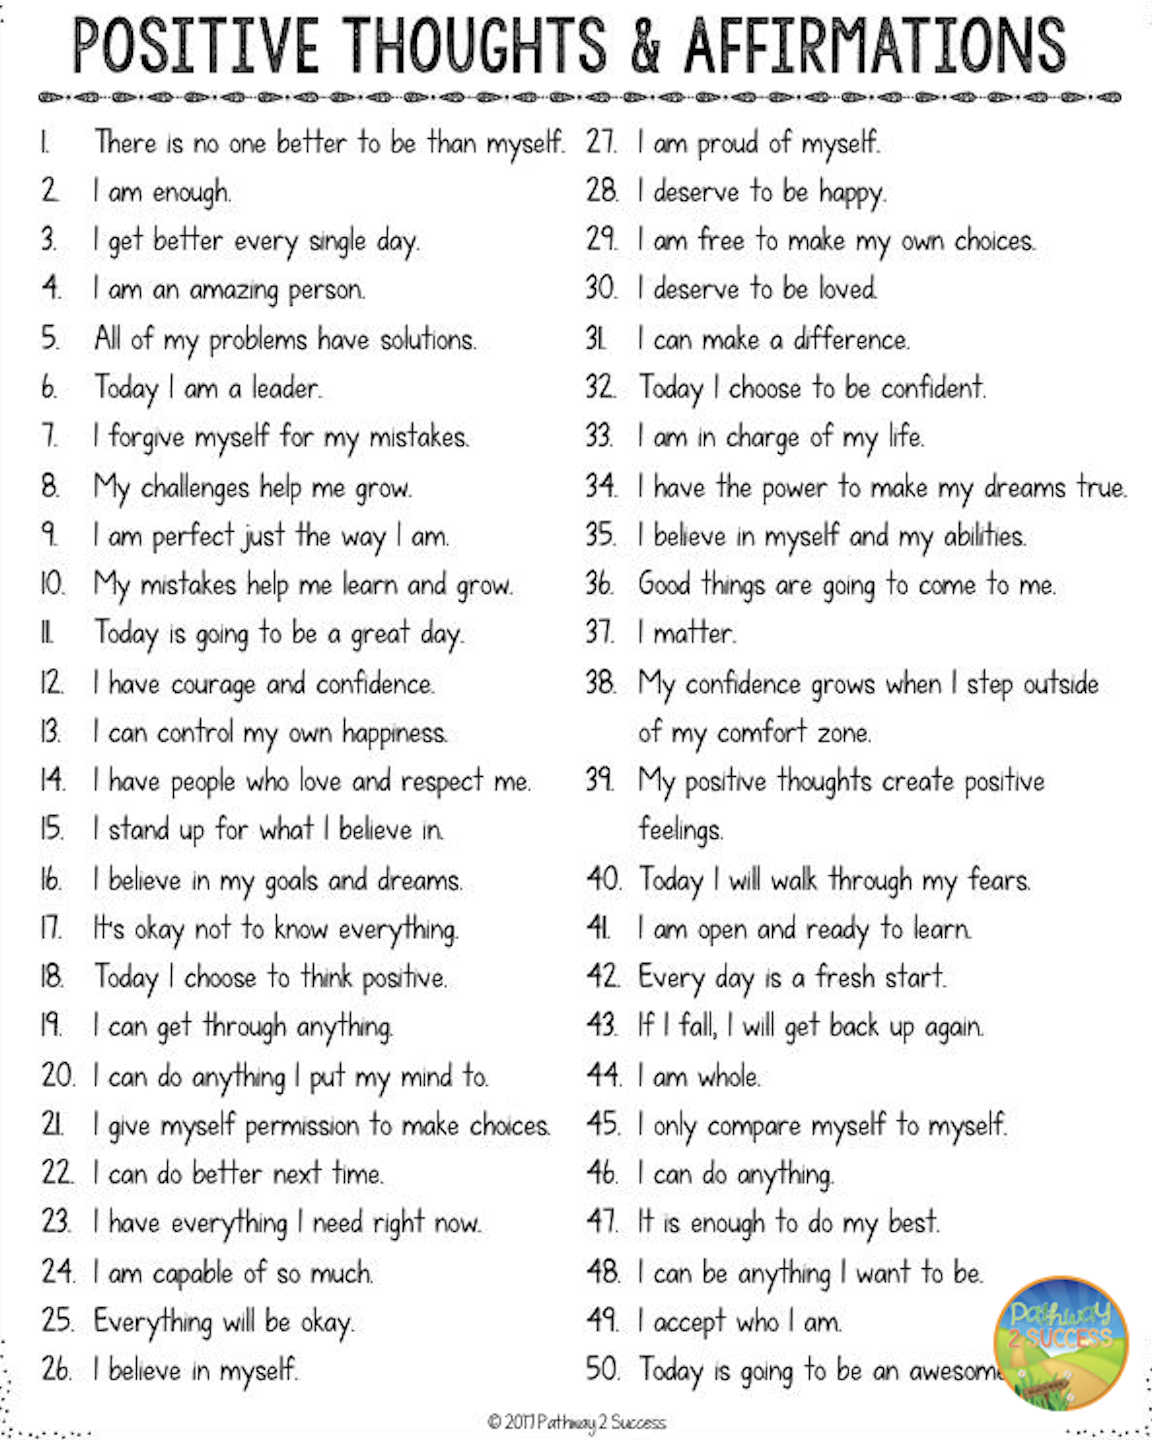 Printable List of Mindful Activities for Adults and Teenagers - StudyPK